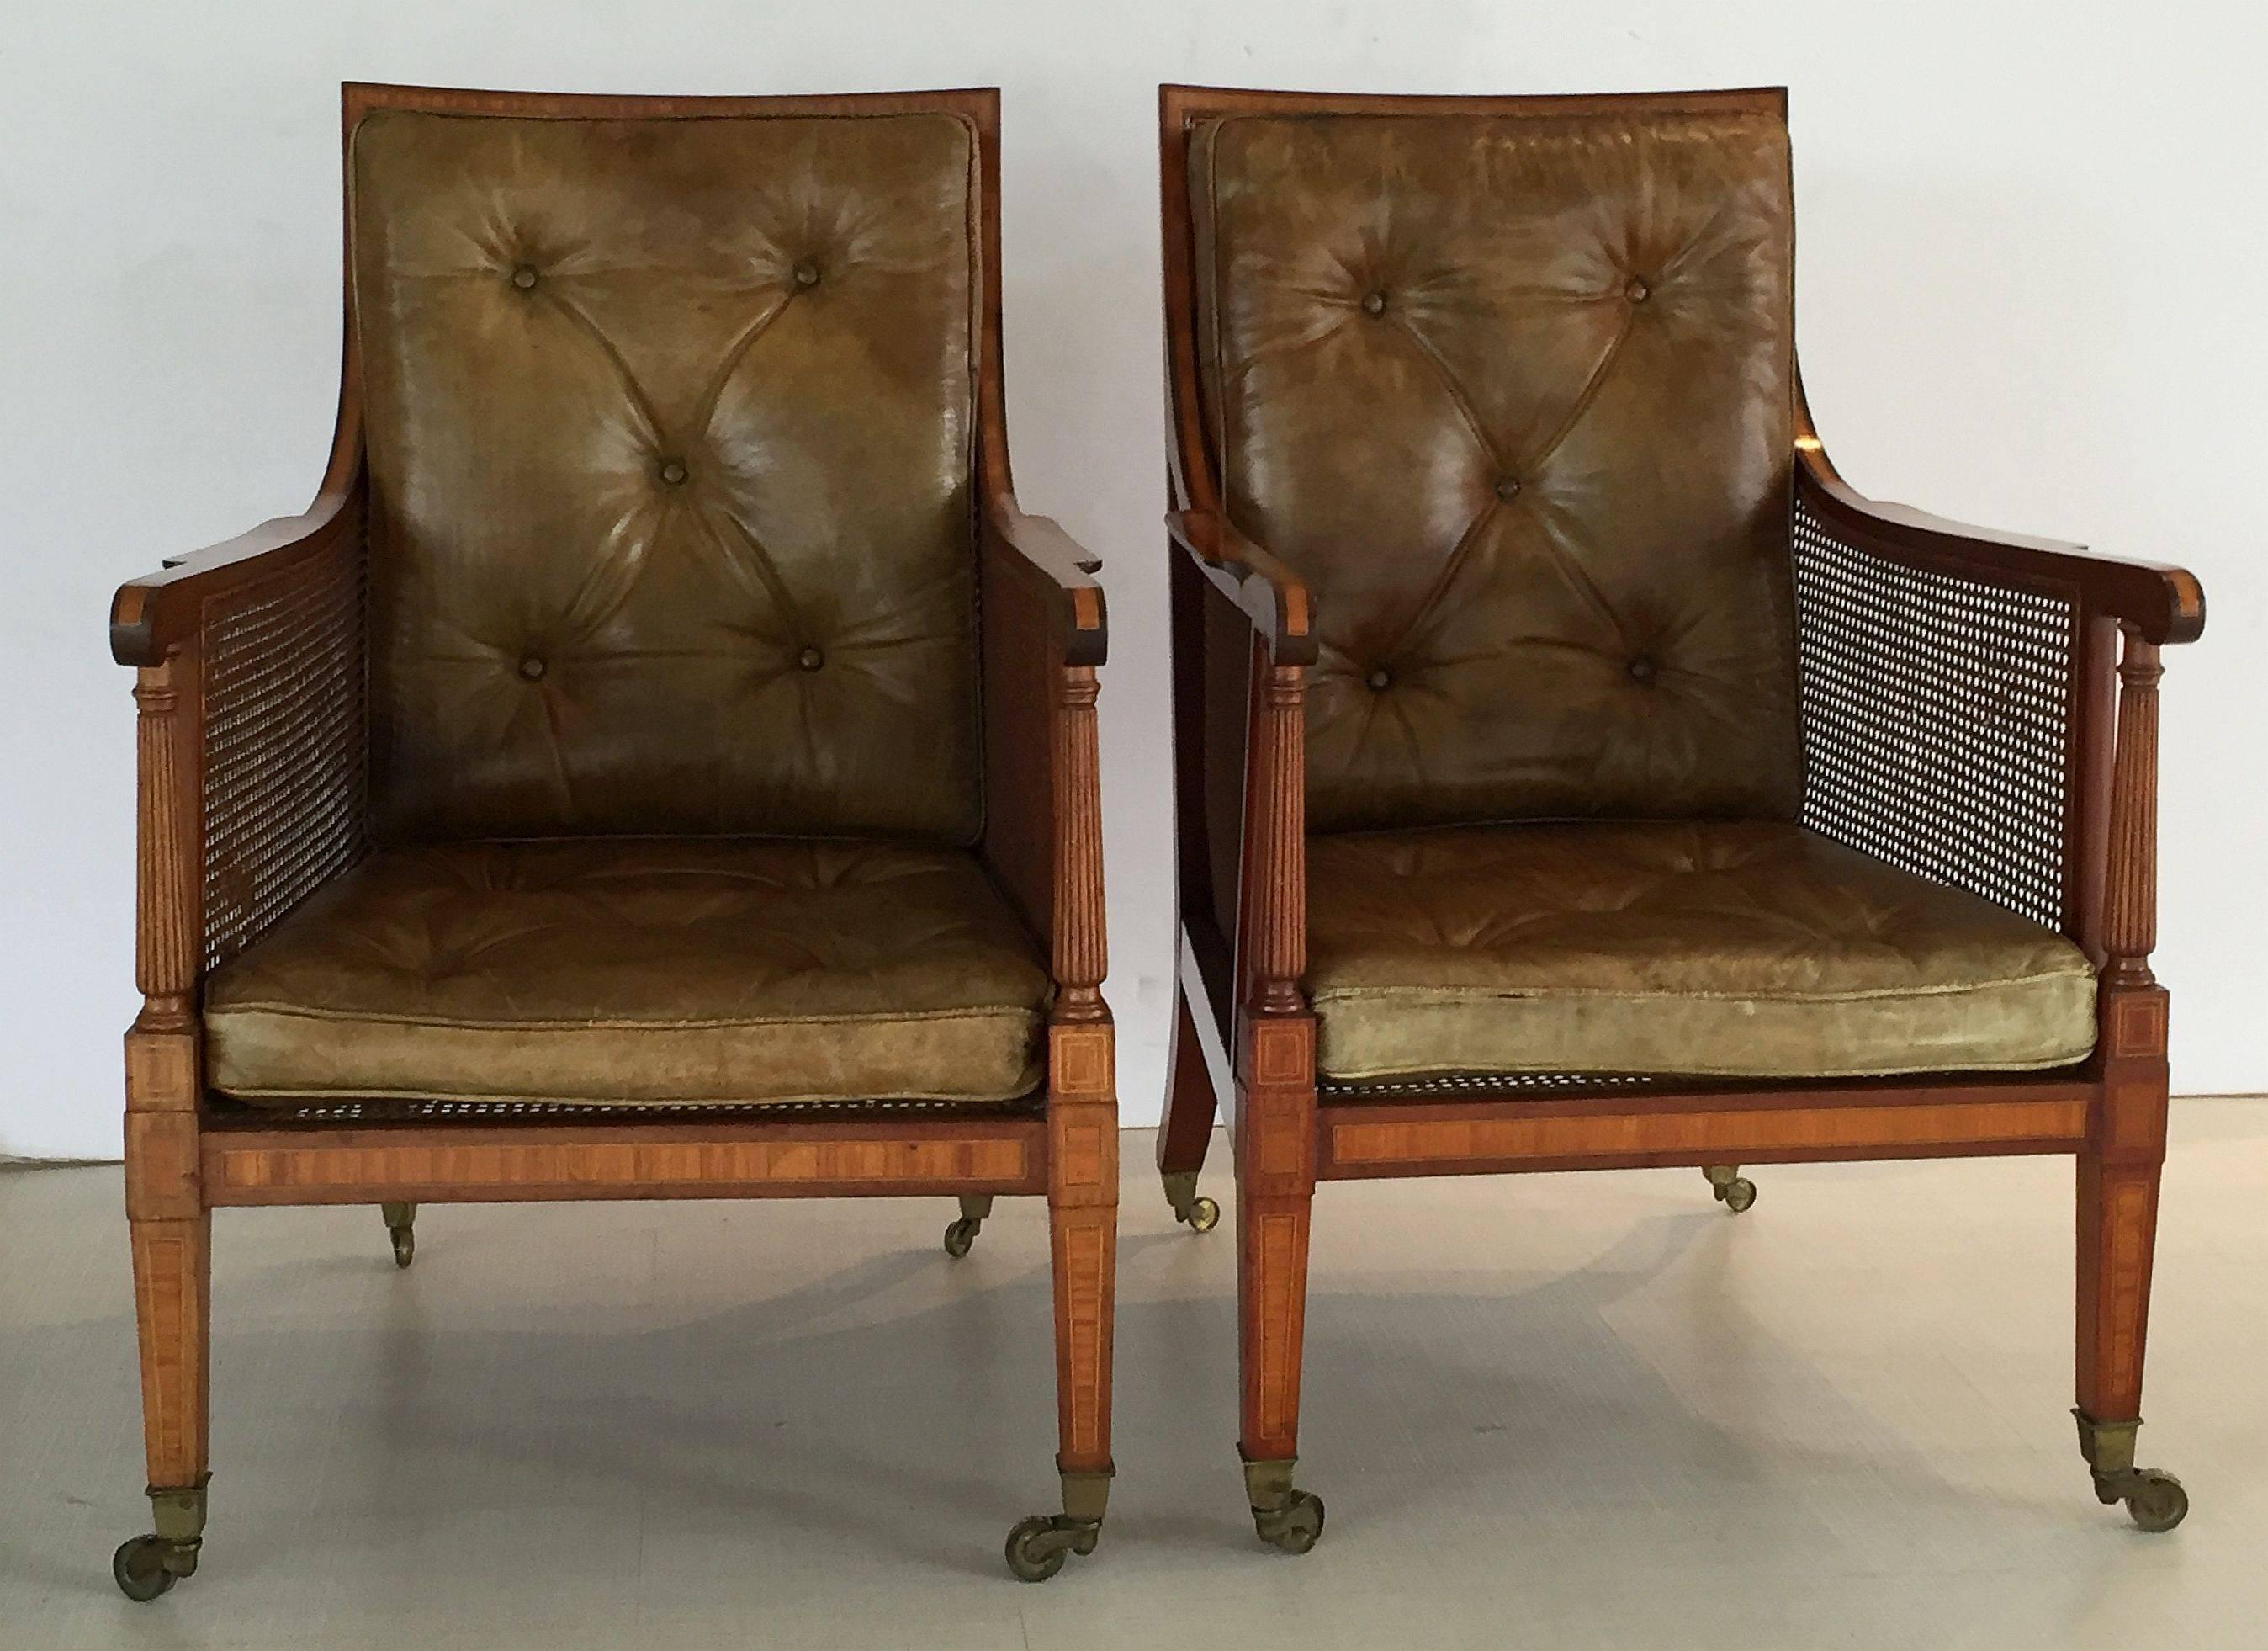 A handsome pair of fine English caned library bergere armchairs from the Edwardian era, each chair featuring inlaid mahogany frames with caned back, seat, and sides. With turned column arm supports and removable tufted leather cushions for the seat